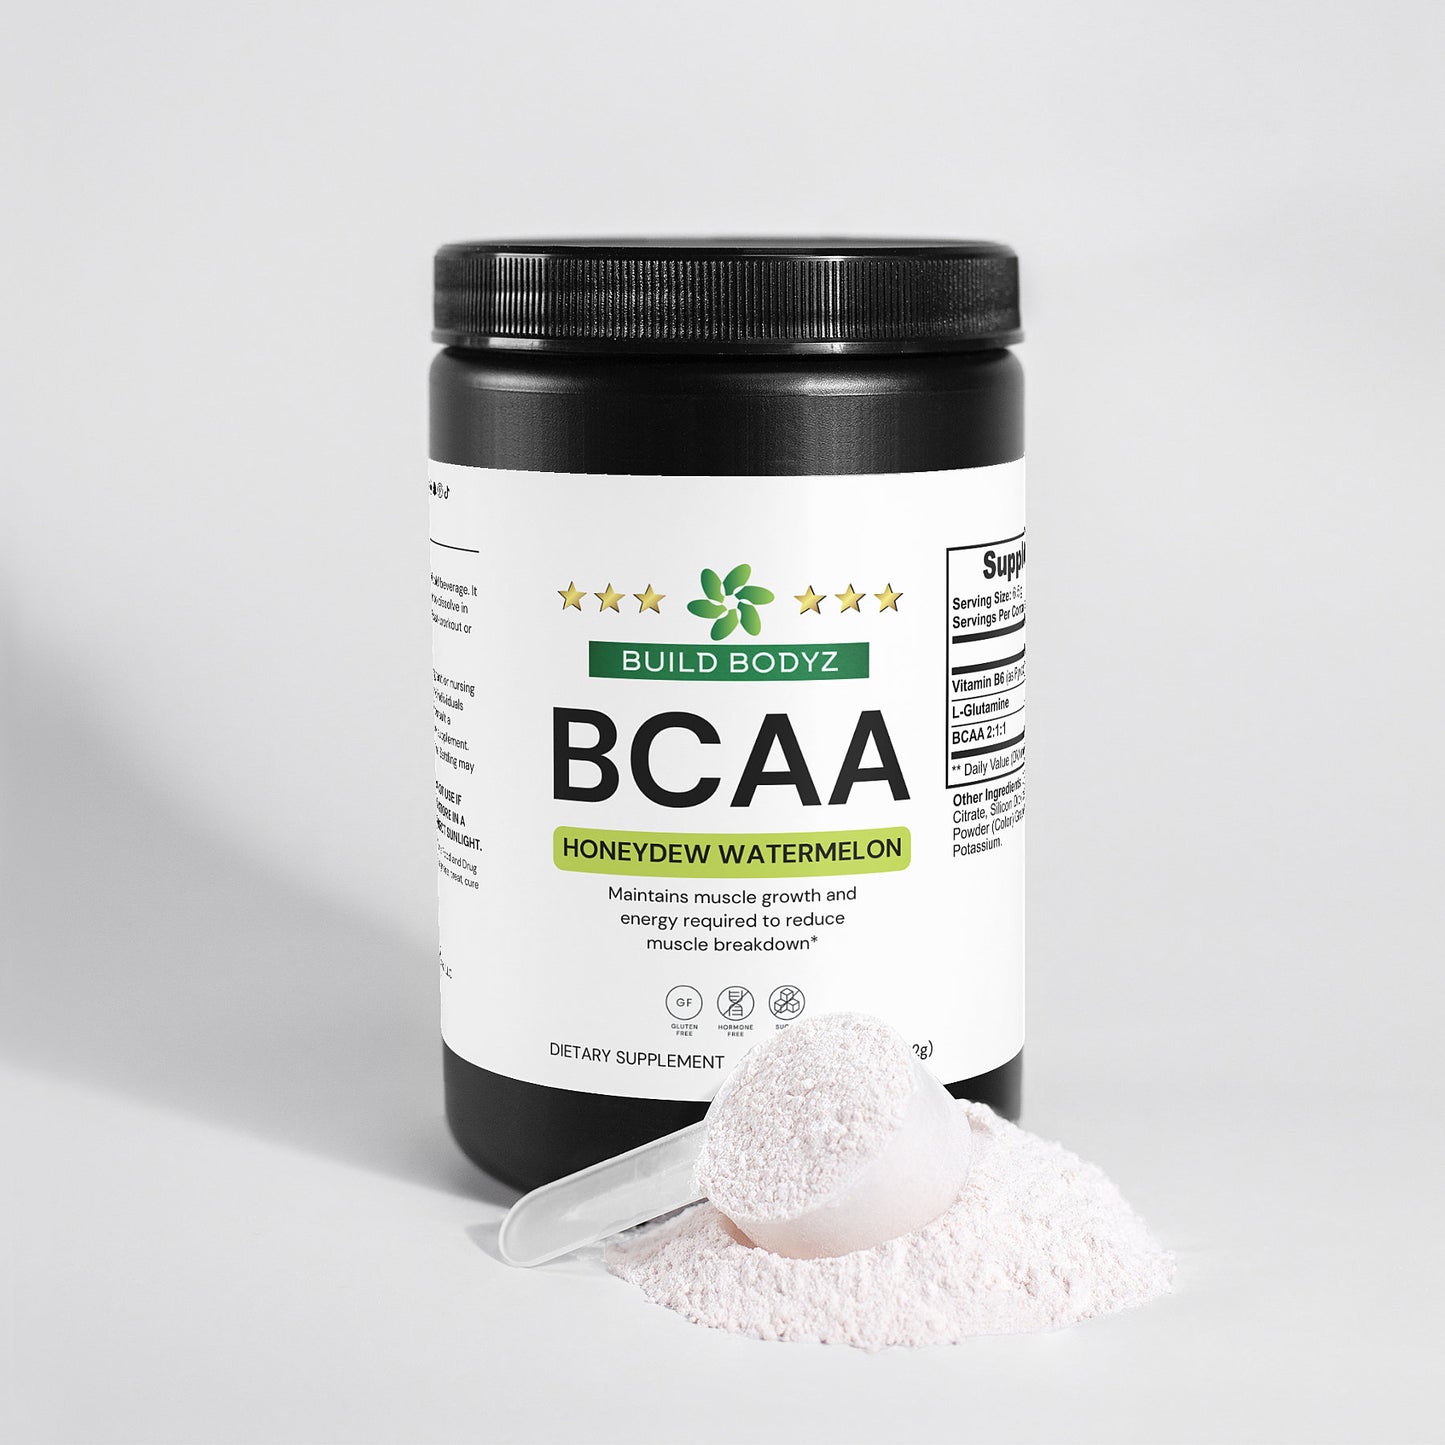 BCAA Post Workout Powder for Lean Muscle and Recovery (Honeydew/Watermelon) - Gluten-Free, Sugar-Free (292g)